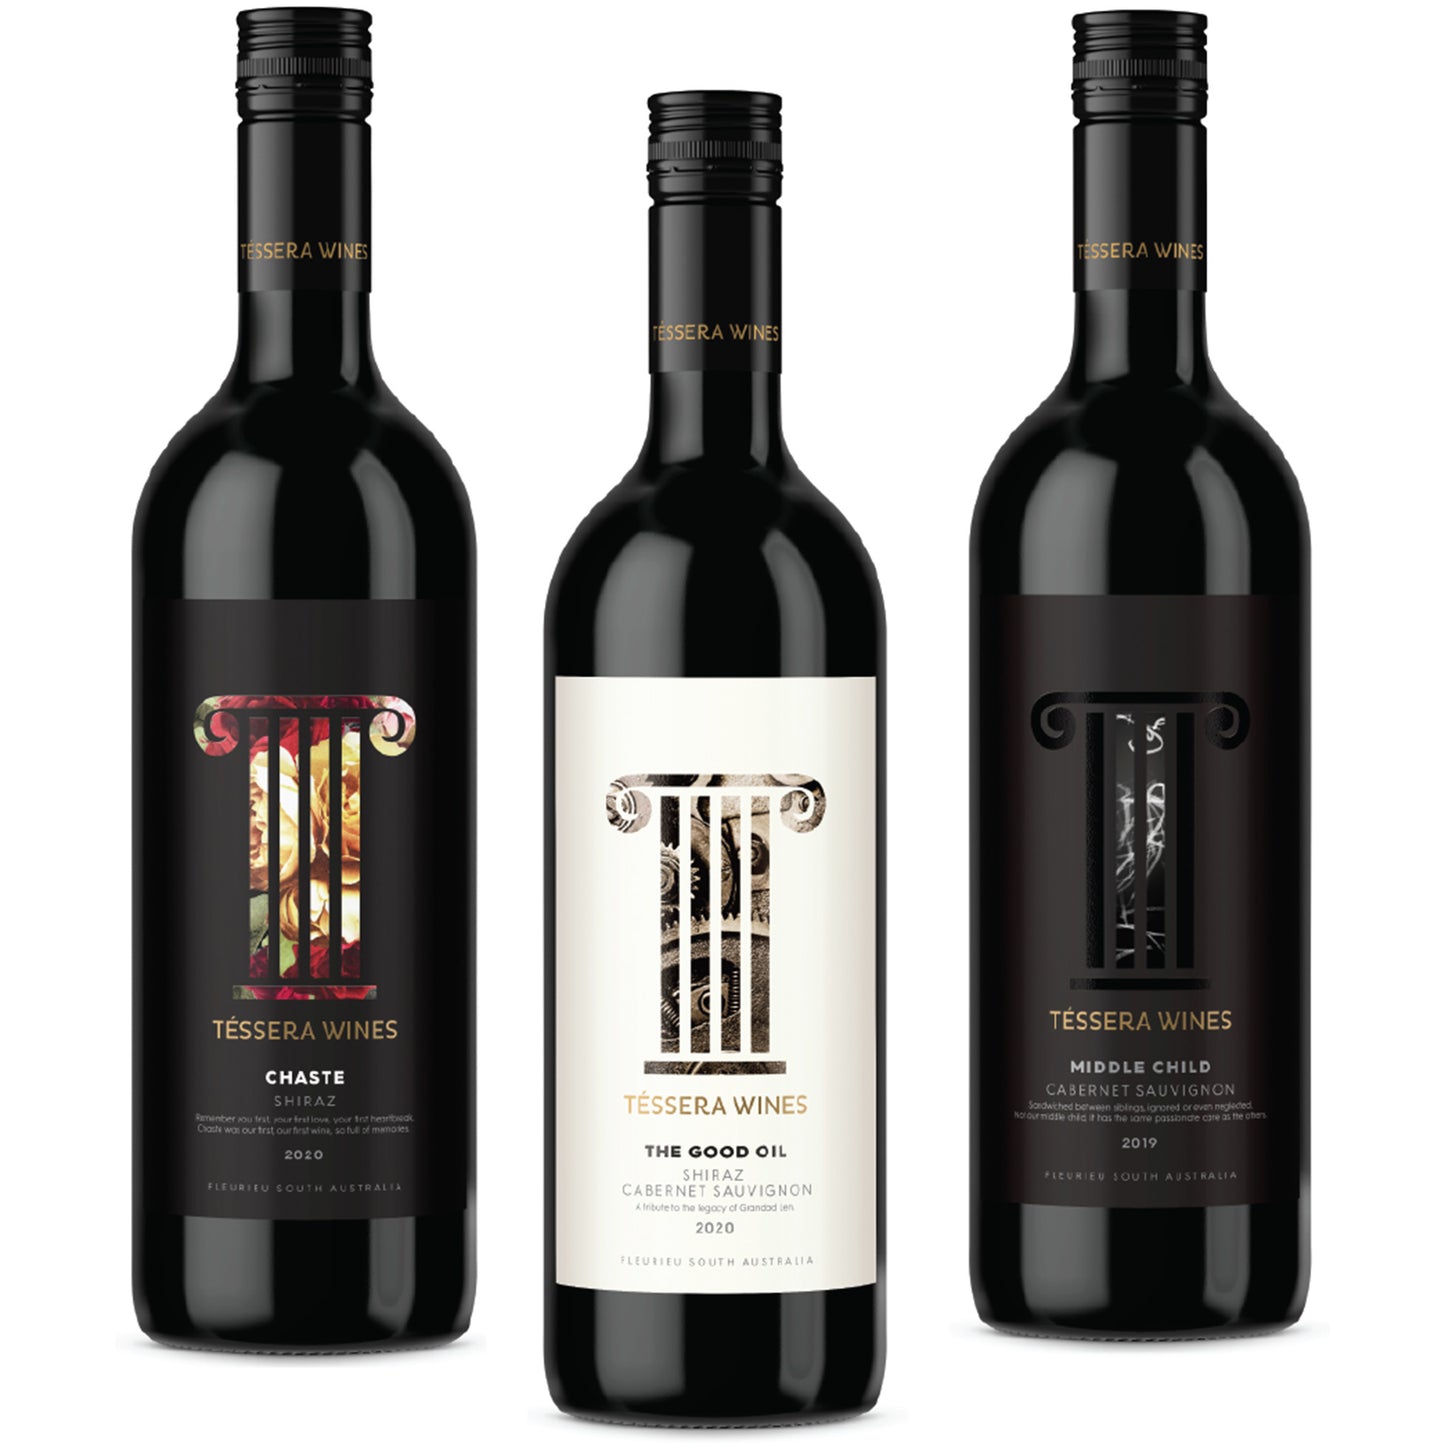 Winter mixed red case from McLaren Vale, South Australia. Enjoy winter this year with our McLaren Vale mixed dozen from Tessera Wines. Cabernet Sauvignon. Shiraz. Shiraz/Cabernet Blend 2019. Produced by award winning Australian winemakers. 